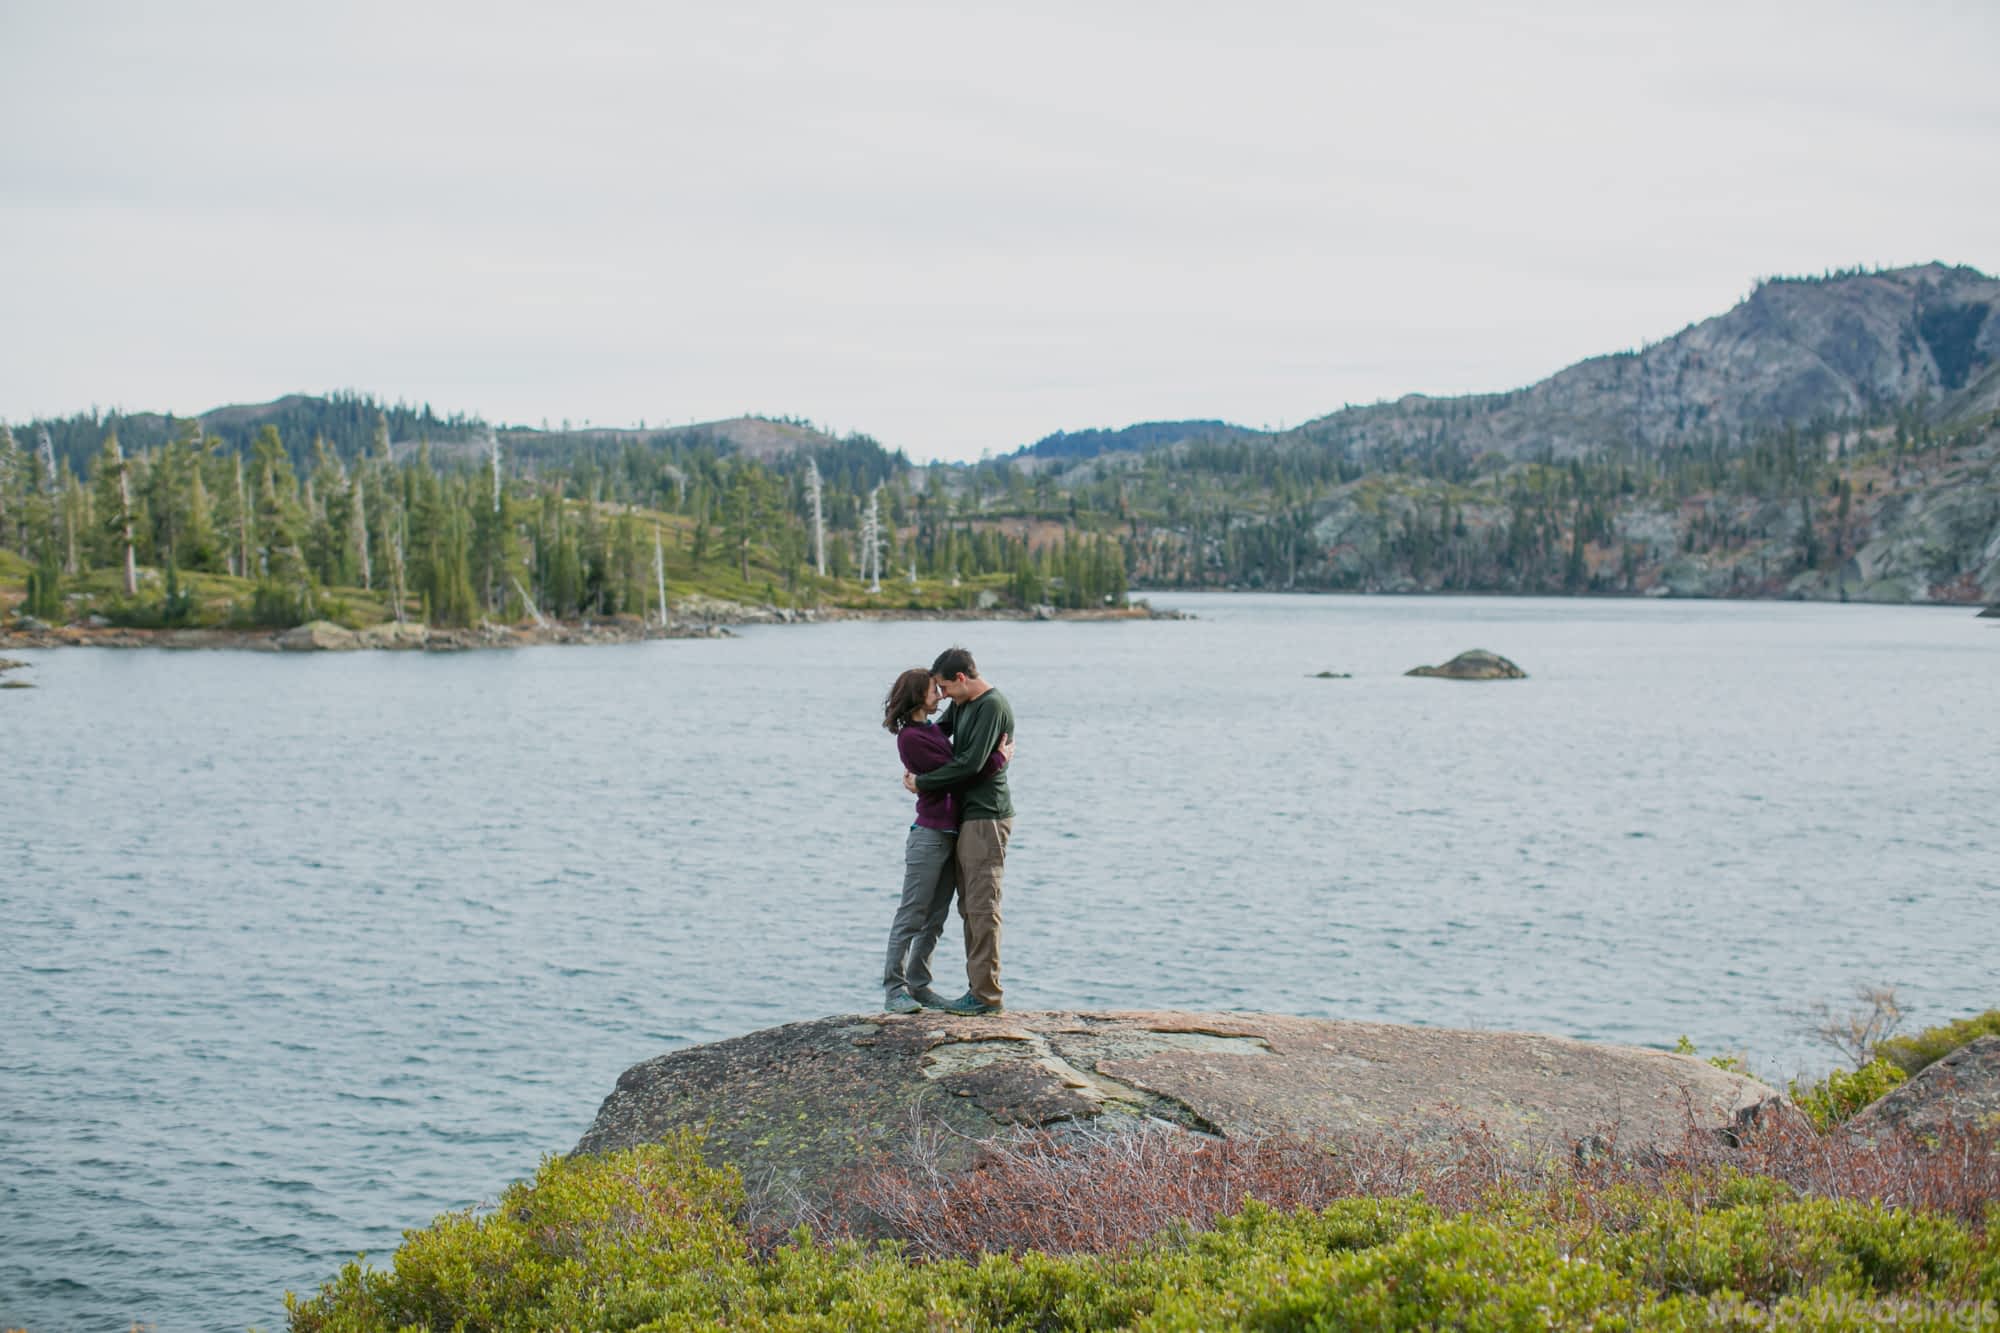 The bride and groom, dressed in hiking clothes, embrace right next to a lake.